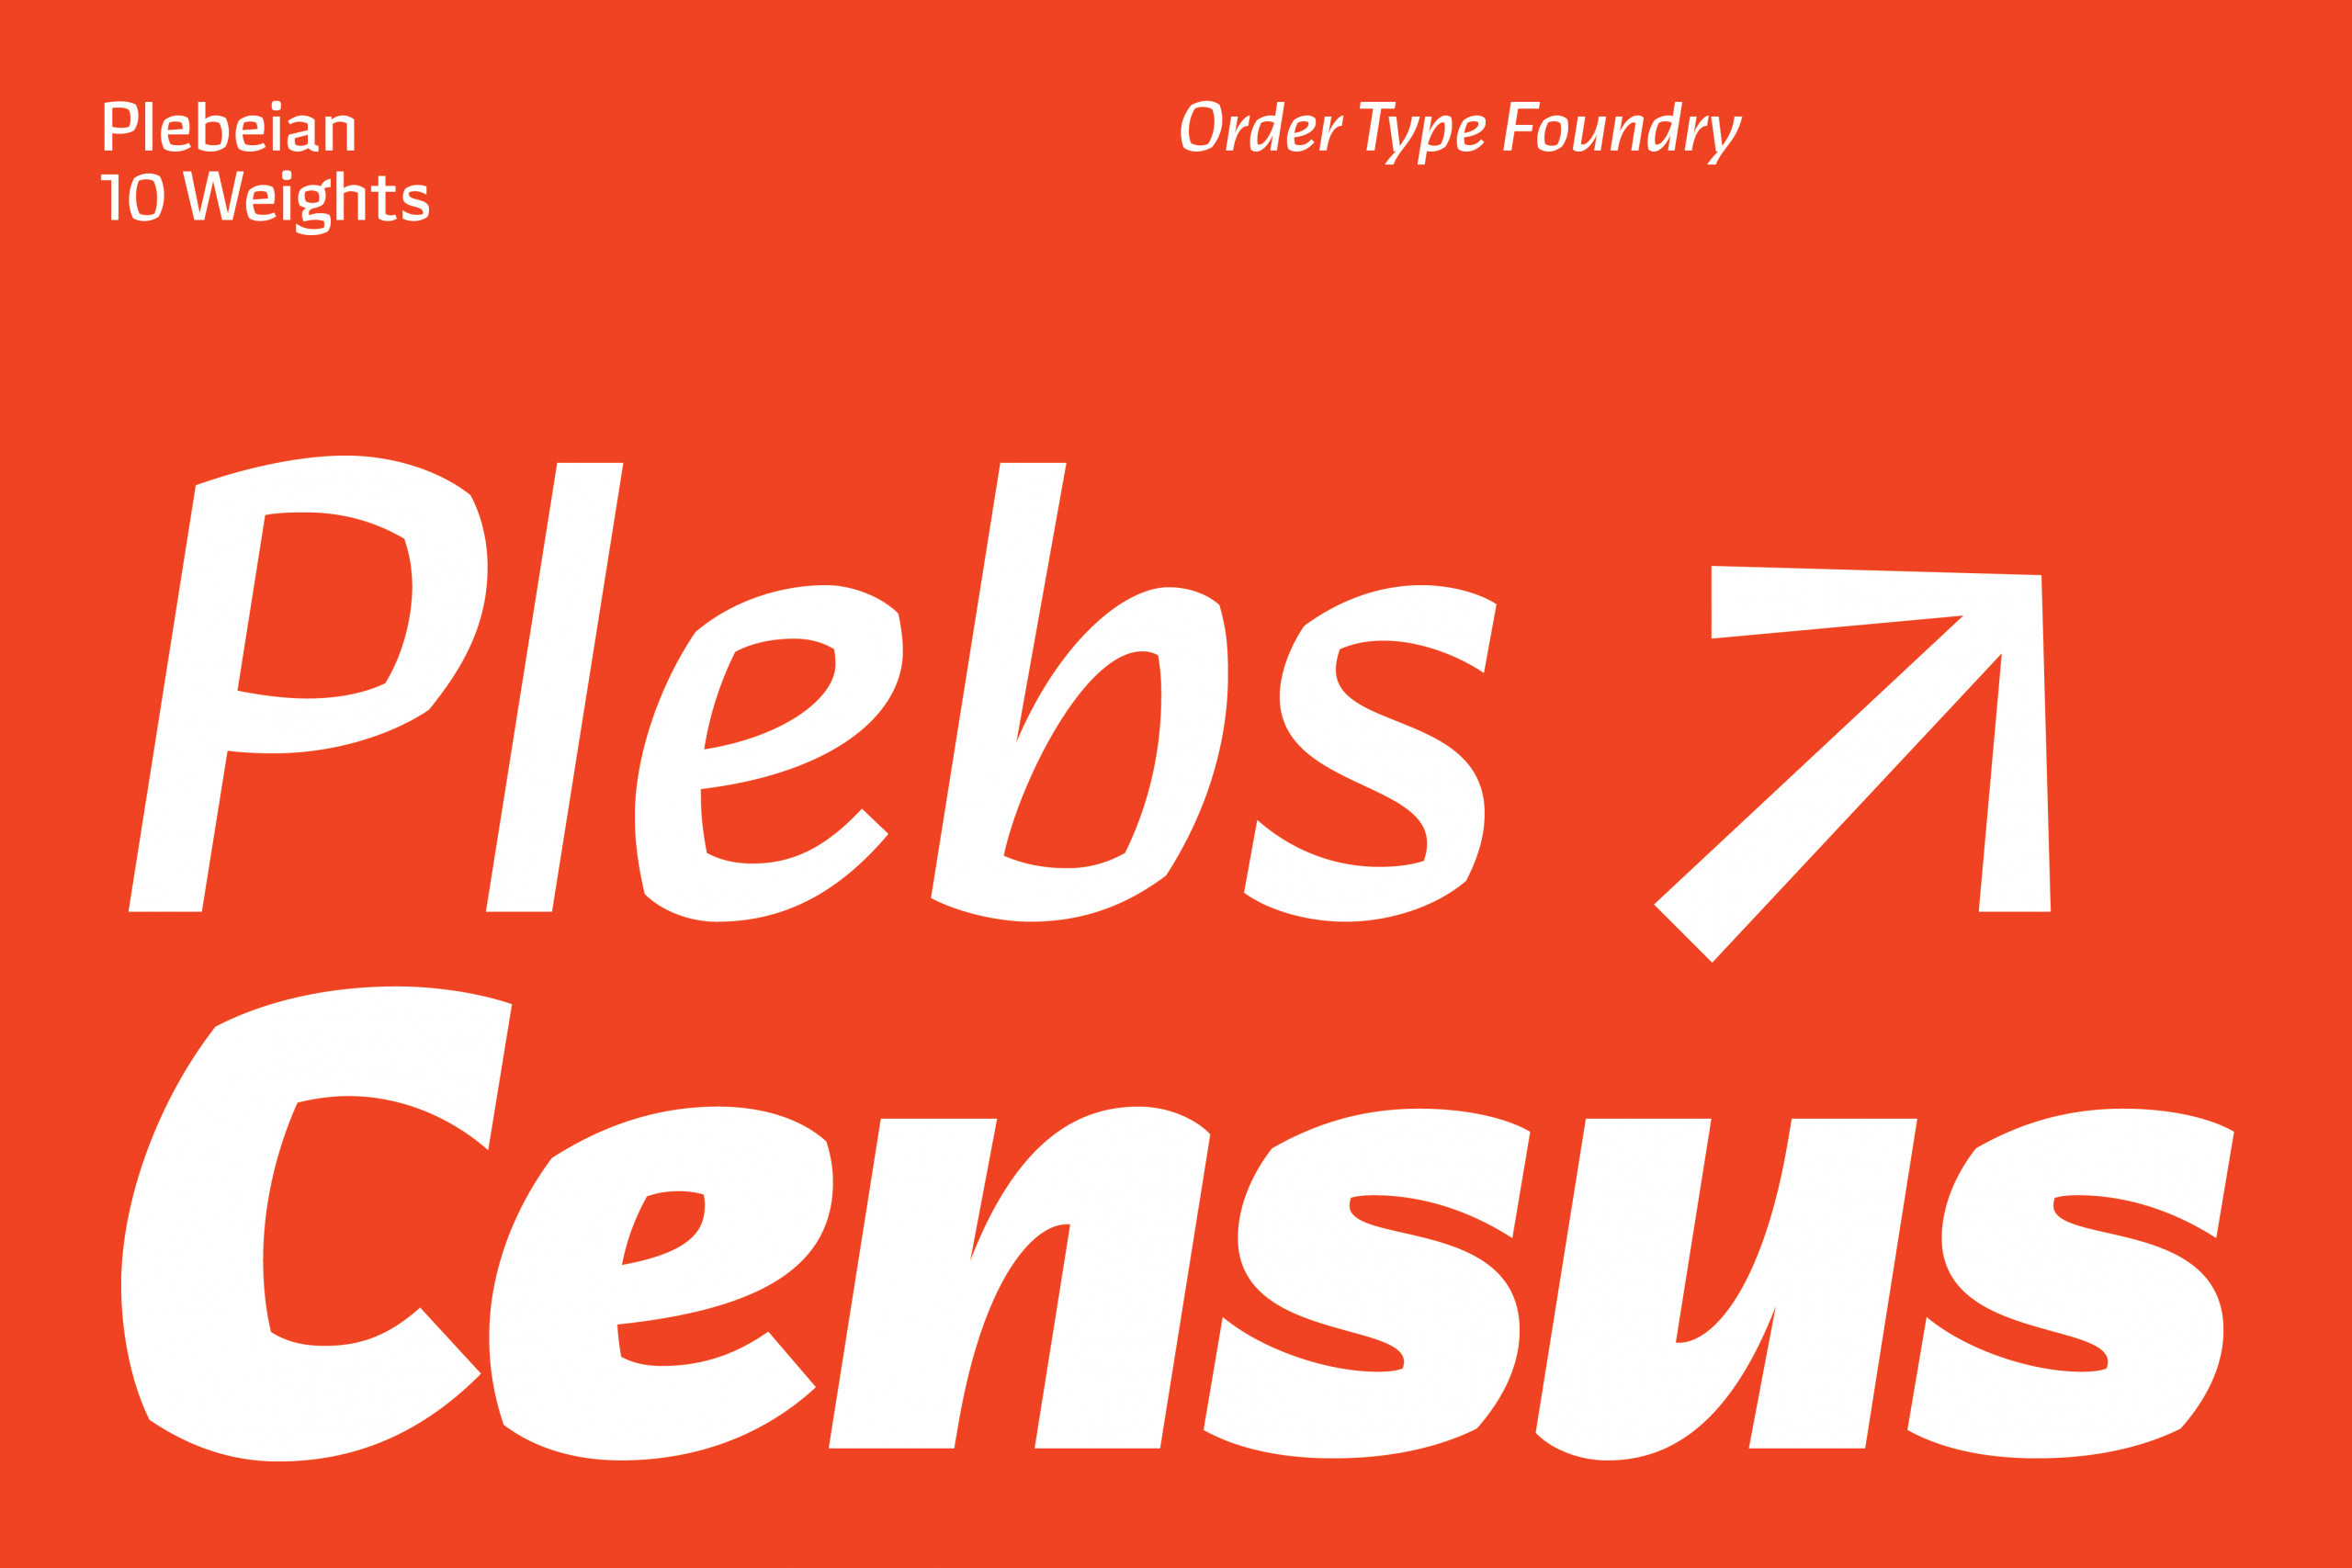 Bold modern font design with text Plebs Census in white on a vibrant orange background, showcasing typography style from Order Type Foundry.